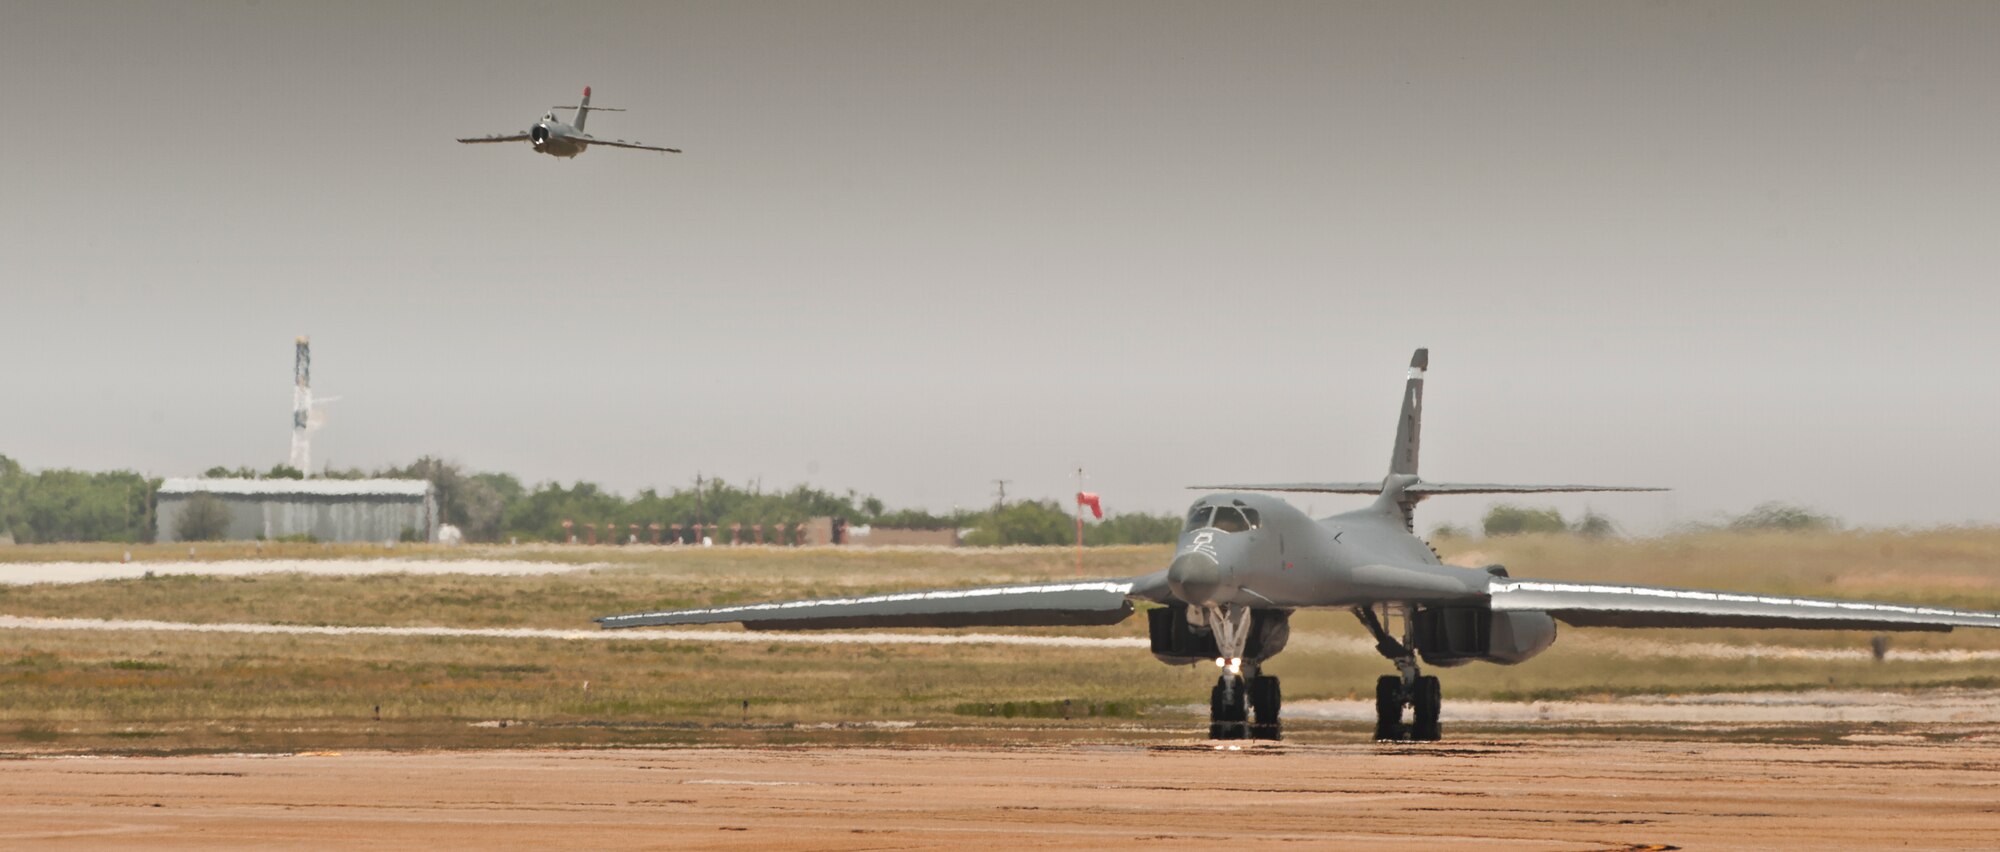 A MiG-17 flies past a B-1 Bomber during the Dyess Big Country Airfest April 28, 2012, at Dyess Air Force Base, Texas. The airfest displayed over 30 static aircrafts while also showcasing a B-2 Spirit, A-10 Thunderbolt, P-47 Thunderbolt and many more. (U.S. Air Force photo by Airman 1st Class Jonathan Stefanko/ Released)